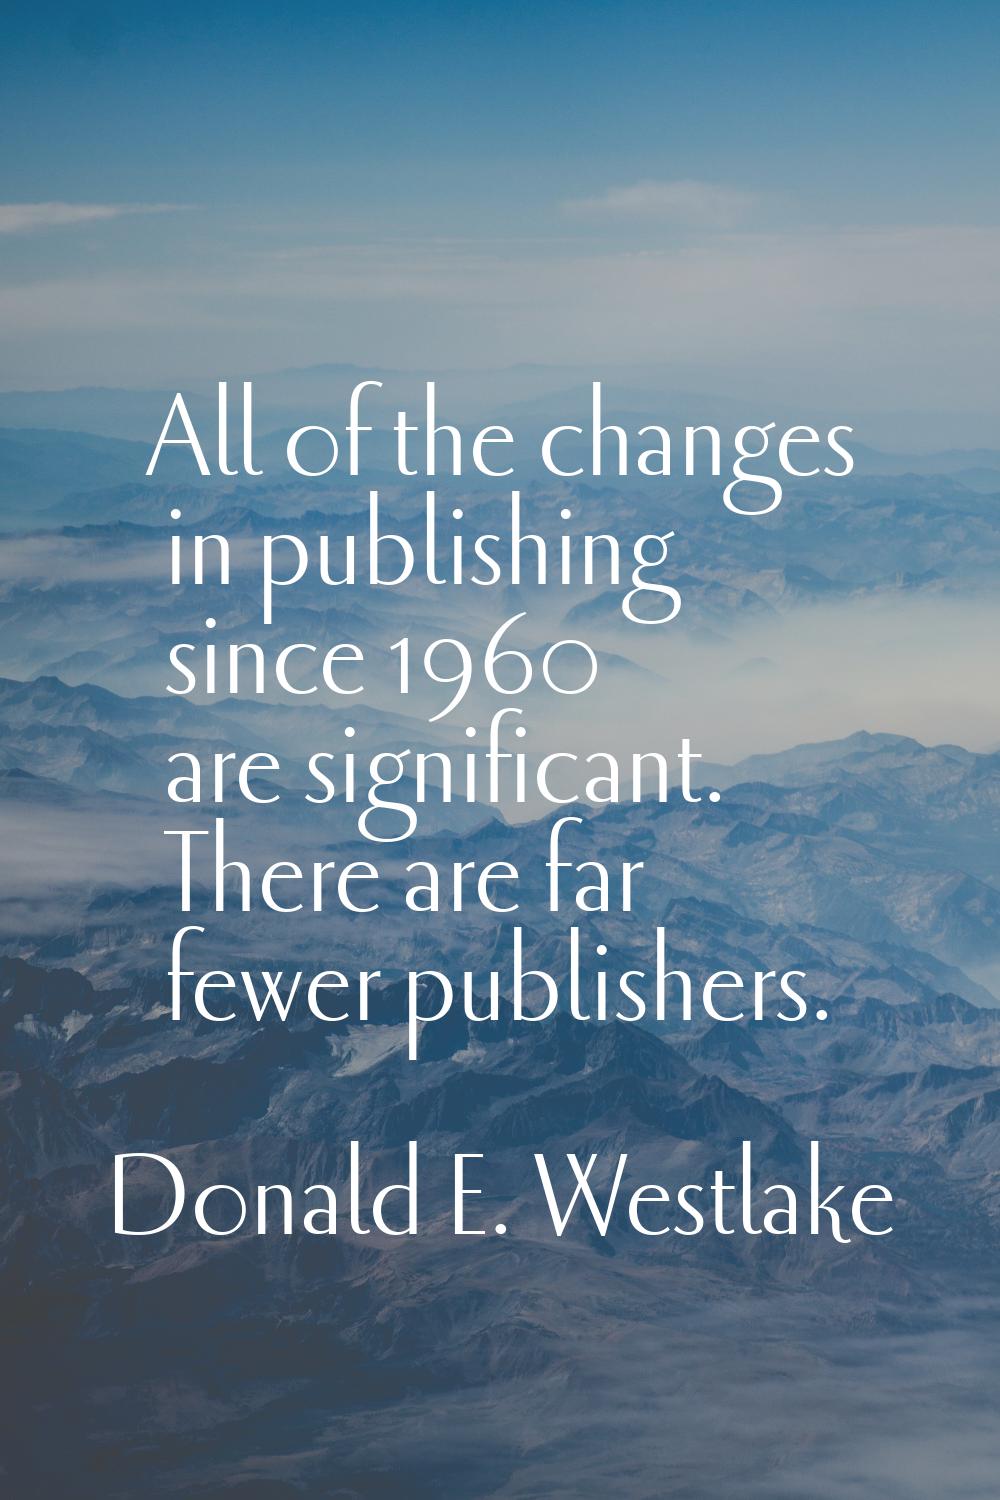 All of the changes in publishing since 1960 are significant. There are far fewer publishers.